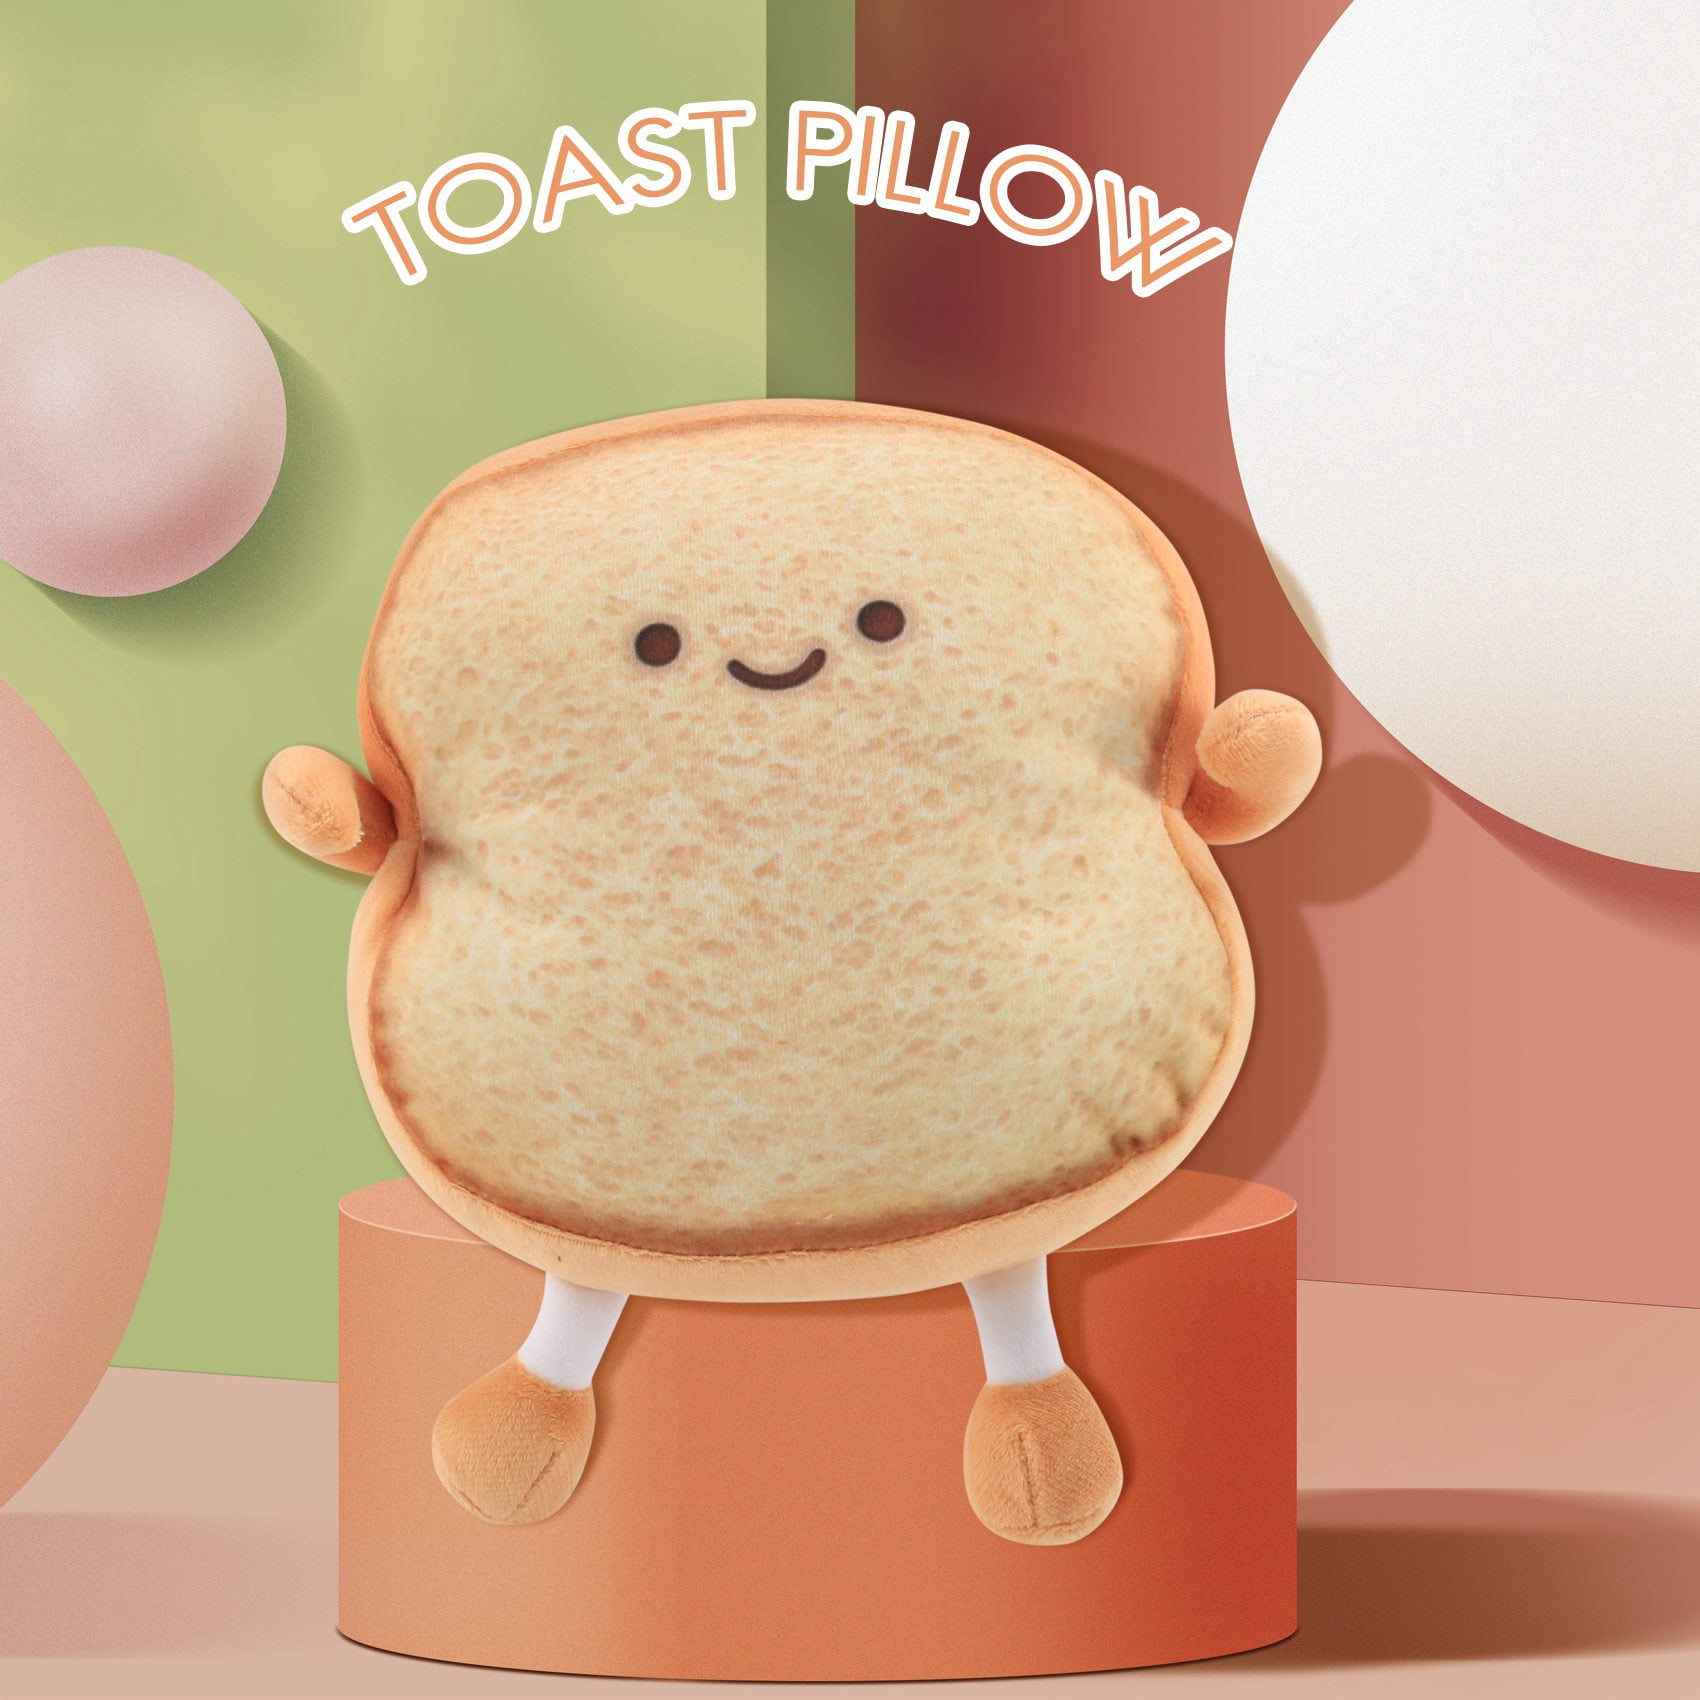  lumogeva Toast Bread Pillow Cushion with Cute Expression,  Kawaii Plush Toy Funny Food Plush Cushion for Office Dorm Bedroom Seat,Plush  Cushion Gift for Birthday, Valentine, Christmas (Square)… : Home & Kitchen